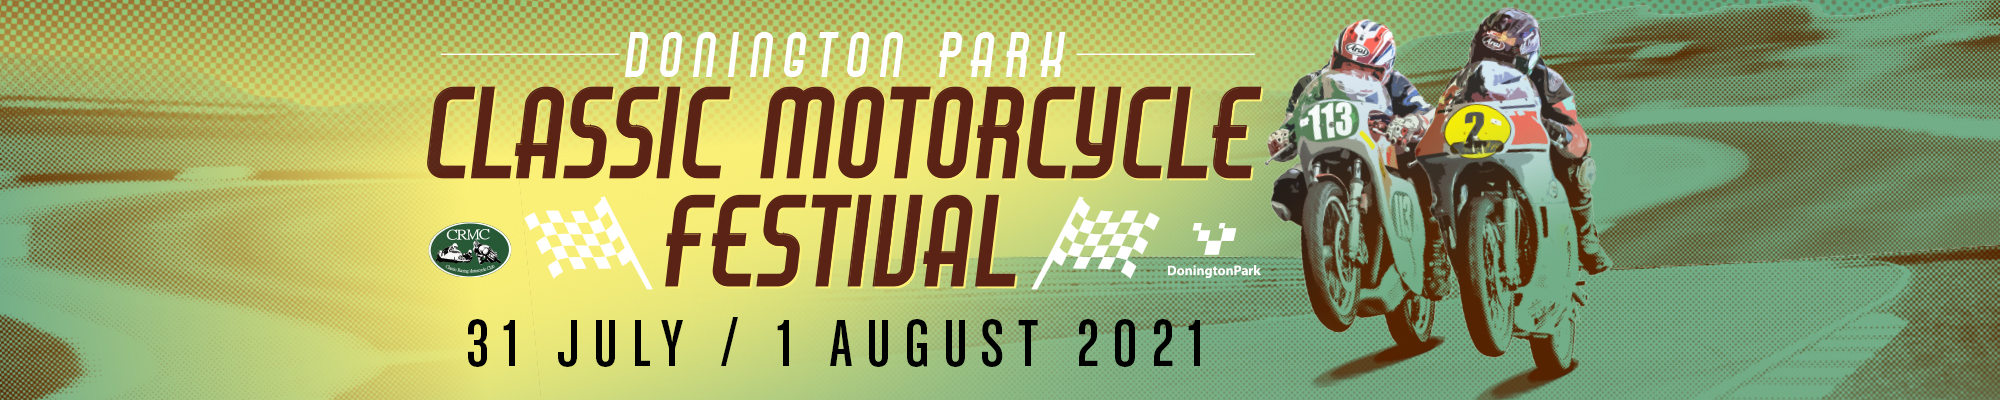 Classic Motorcycle Festival